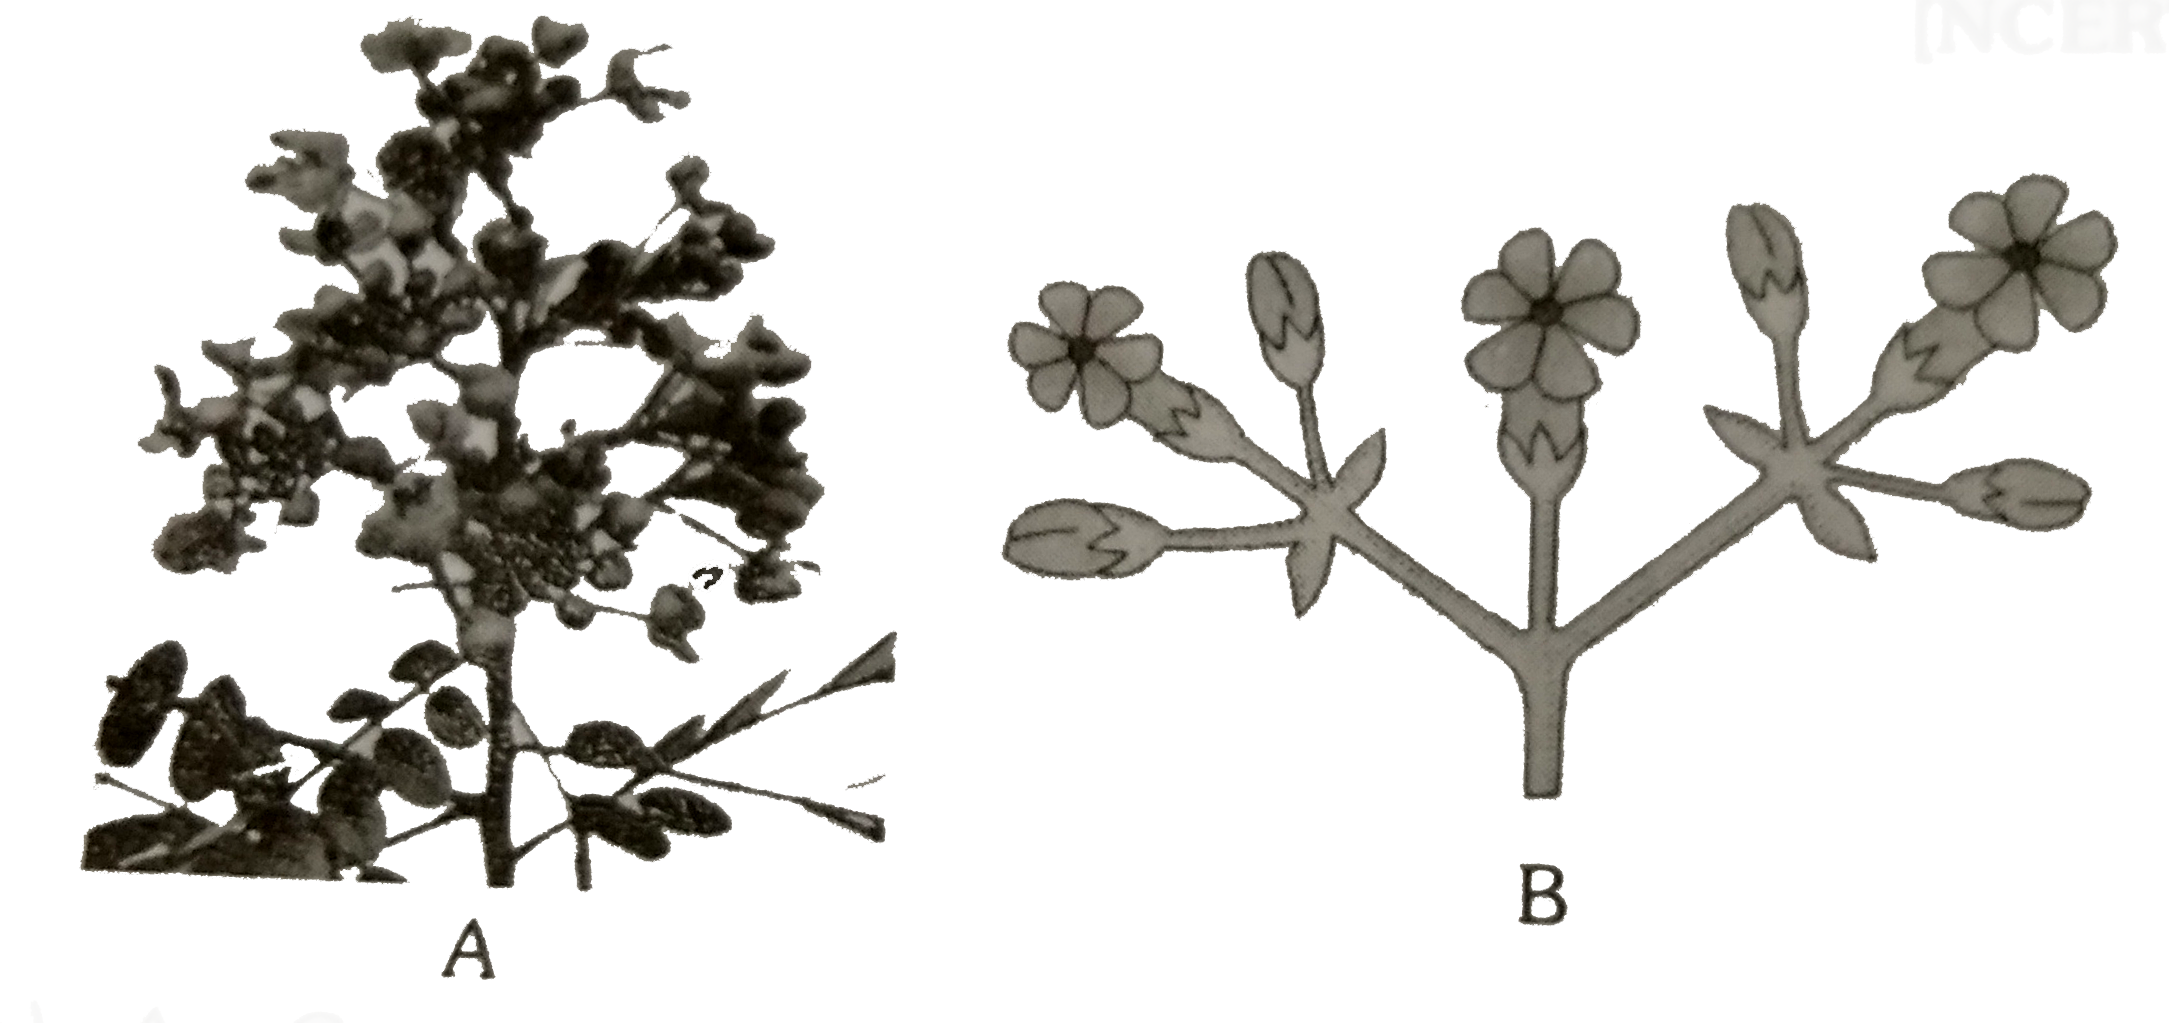 See the folling diagrams and identify inflorescence A and B